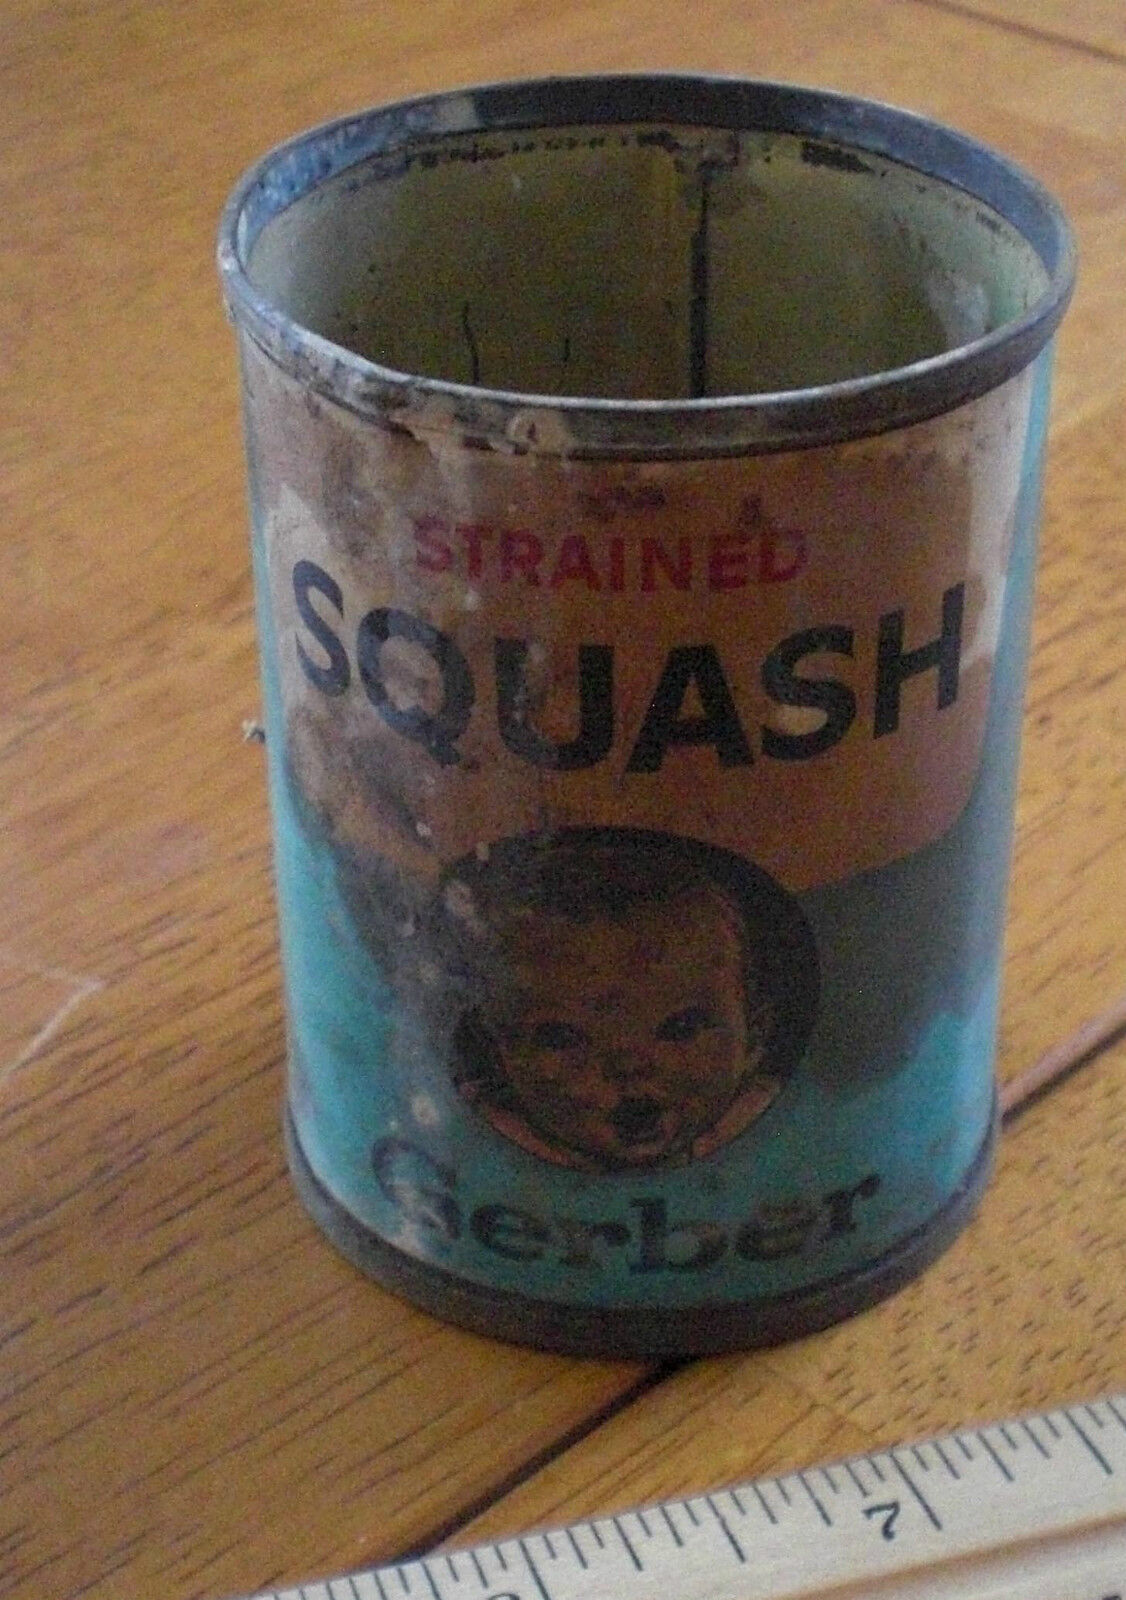 1960's vintage Gerber Strained Squash tin can ORIGINAL CLASSIC